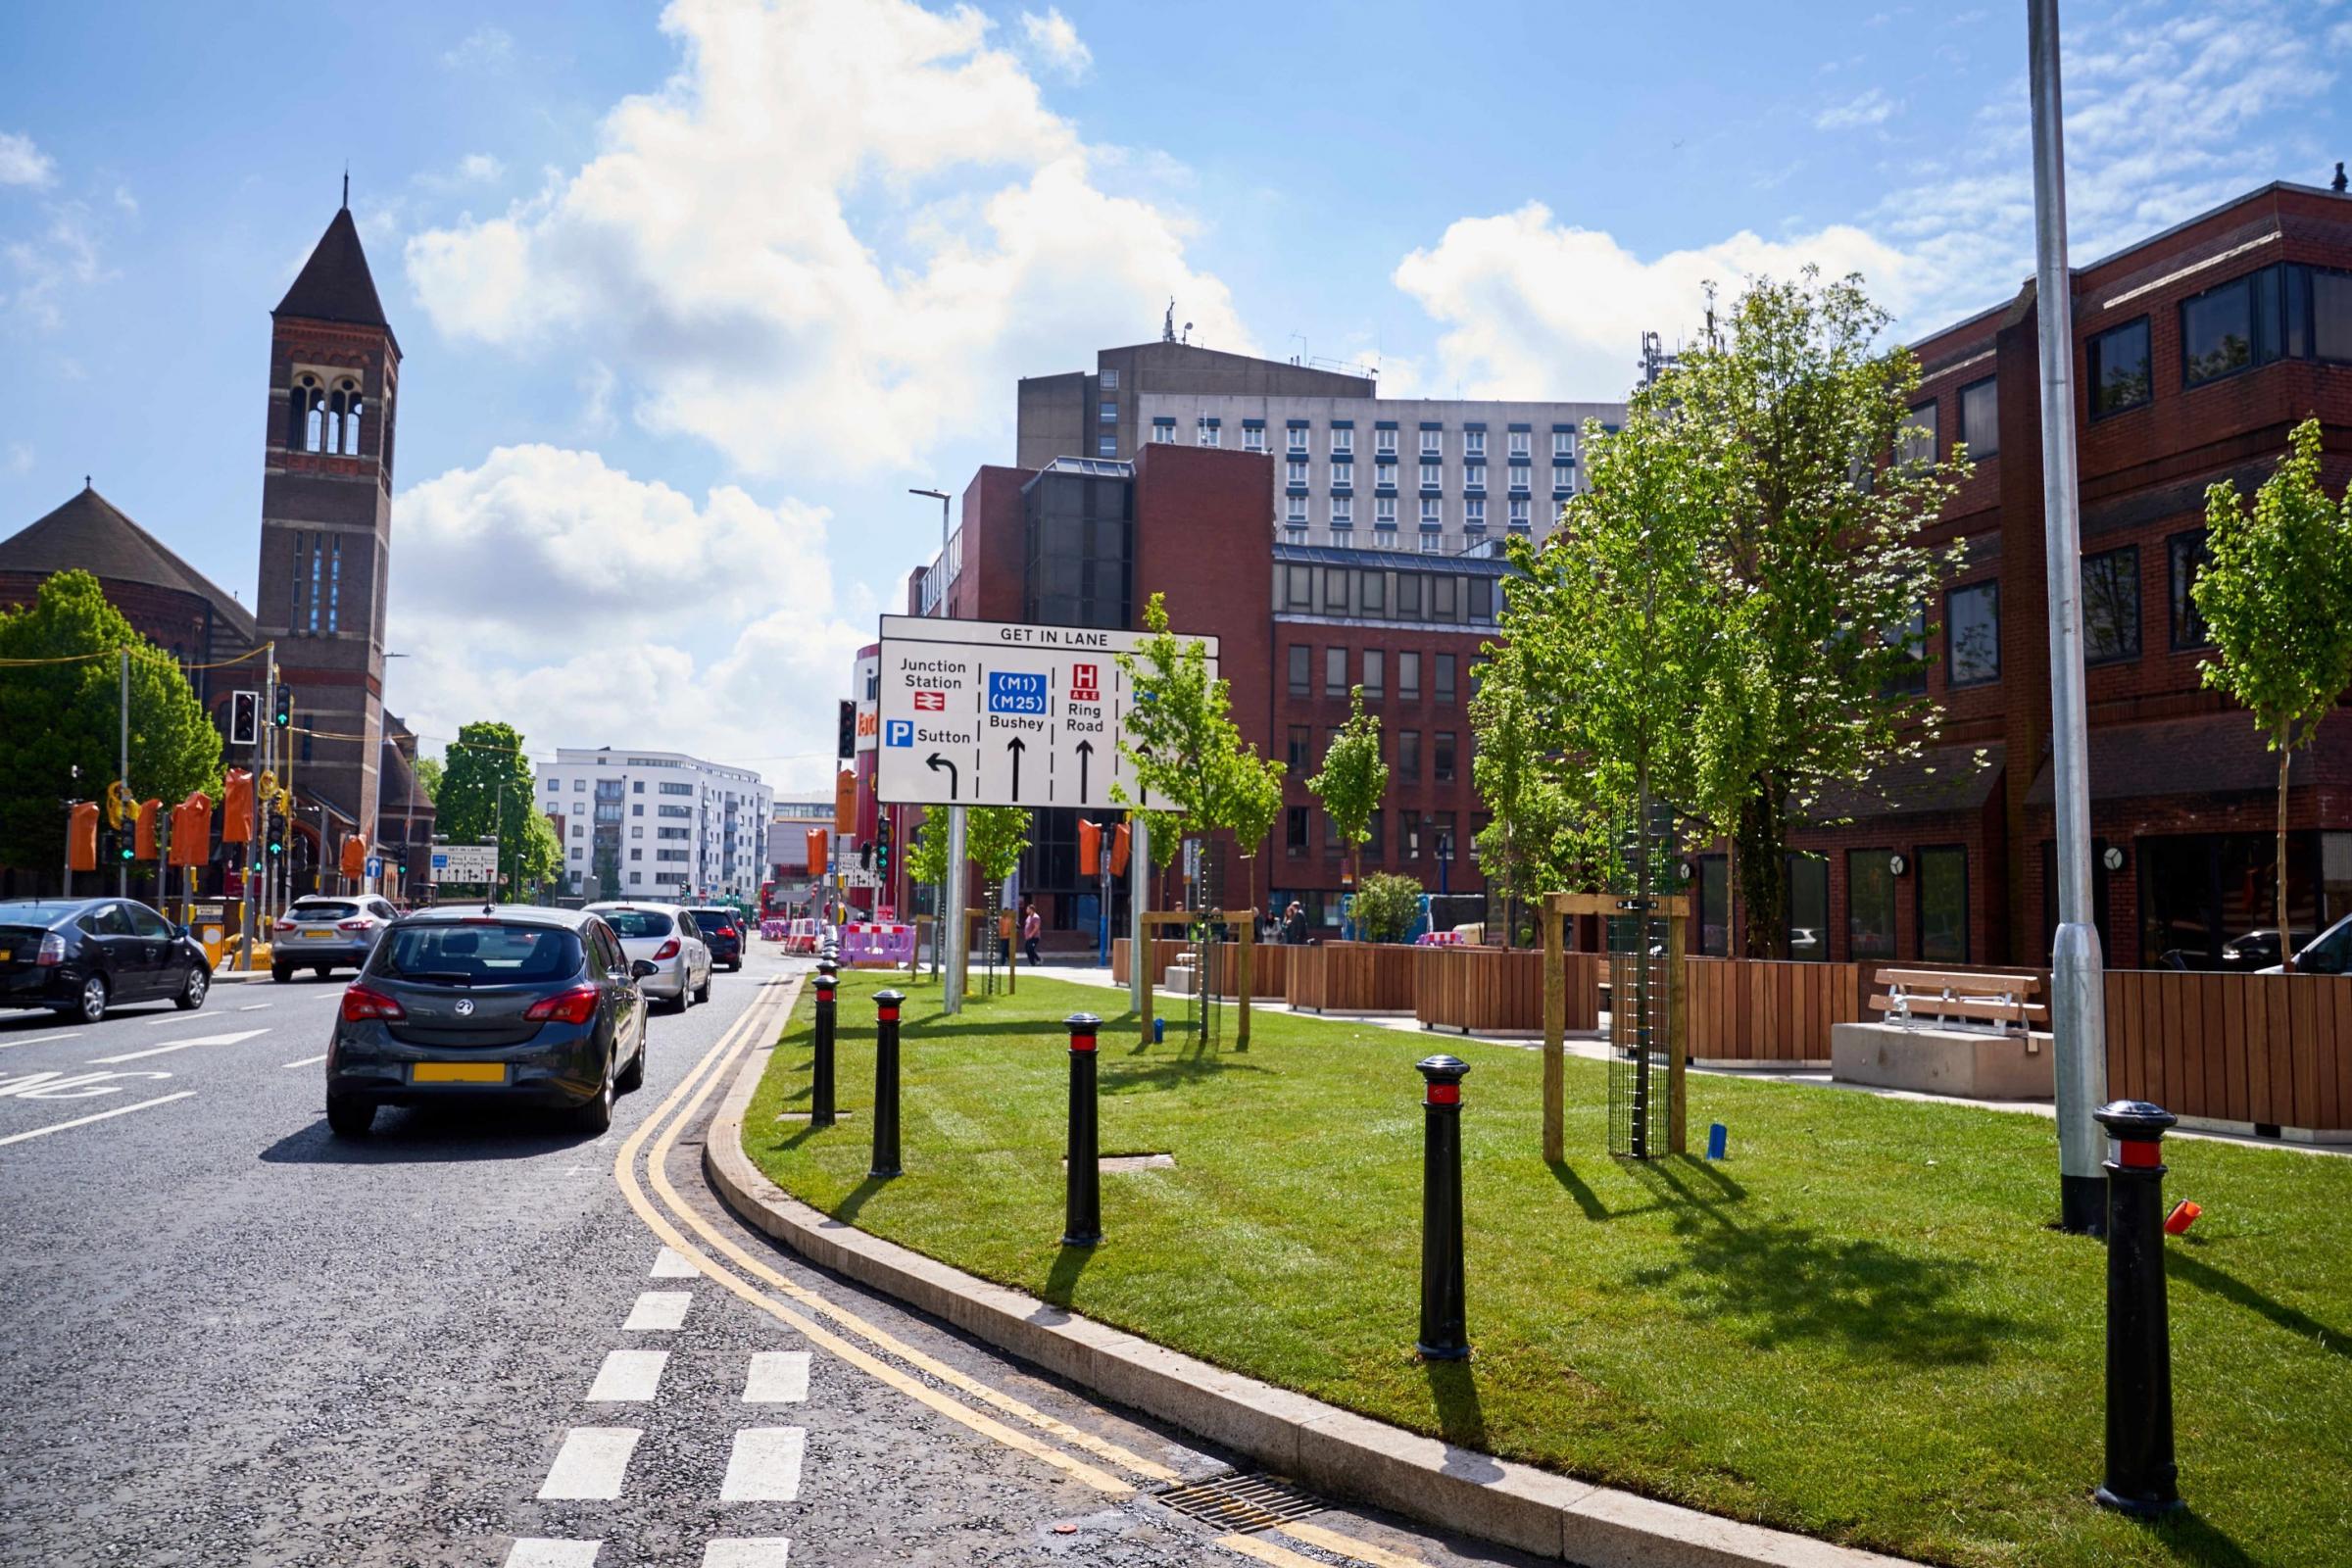 On the right is the RBS building and on the left is Beechen Grove Baptist Church. Shown is the junction of Clarendon Road and the ring road. Credit: Watford Council